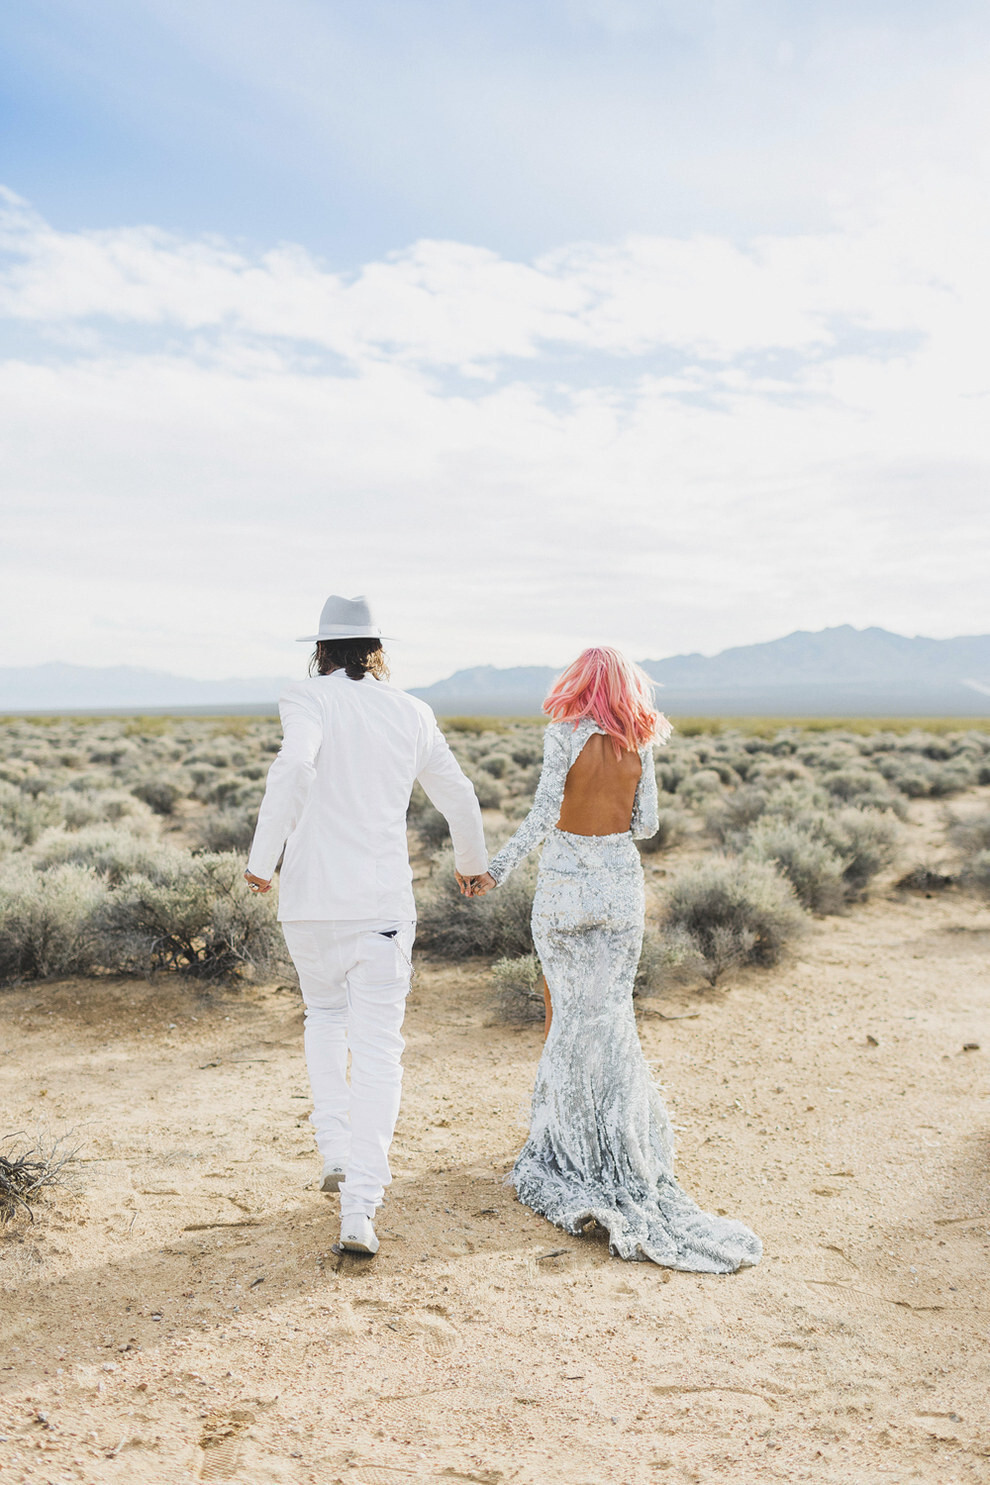 This Couple’s Un-Wedding Will Make You Want To Get Hitched